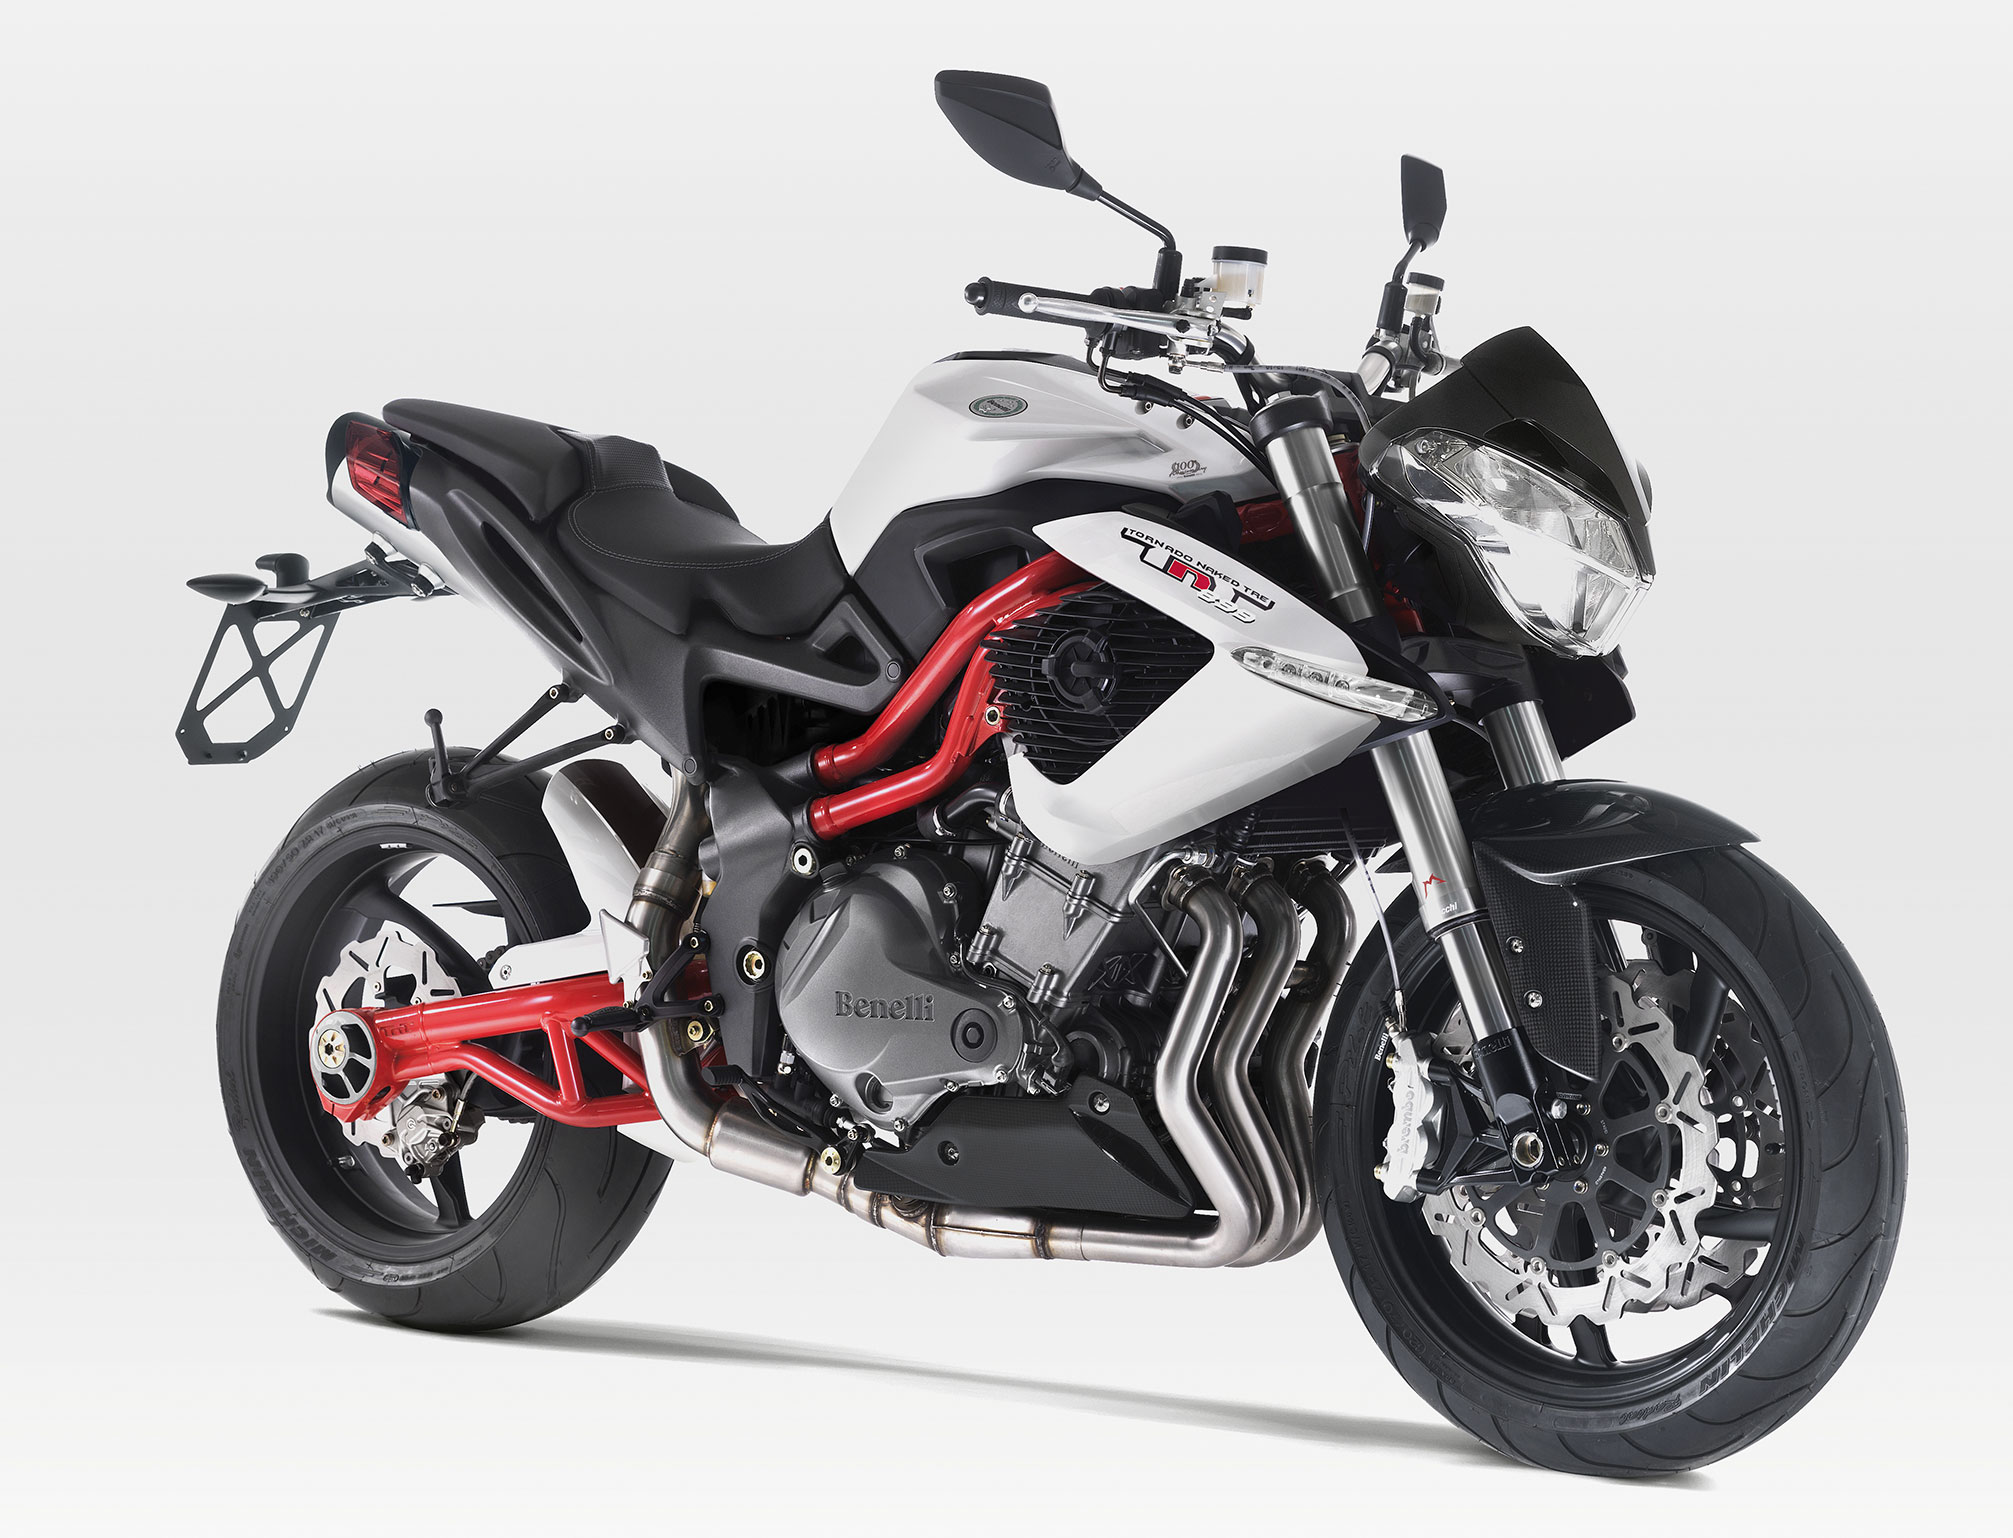 2013 Benelli Tornado Naked TRE899 Review